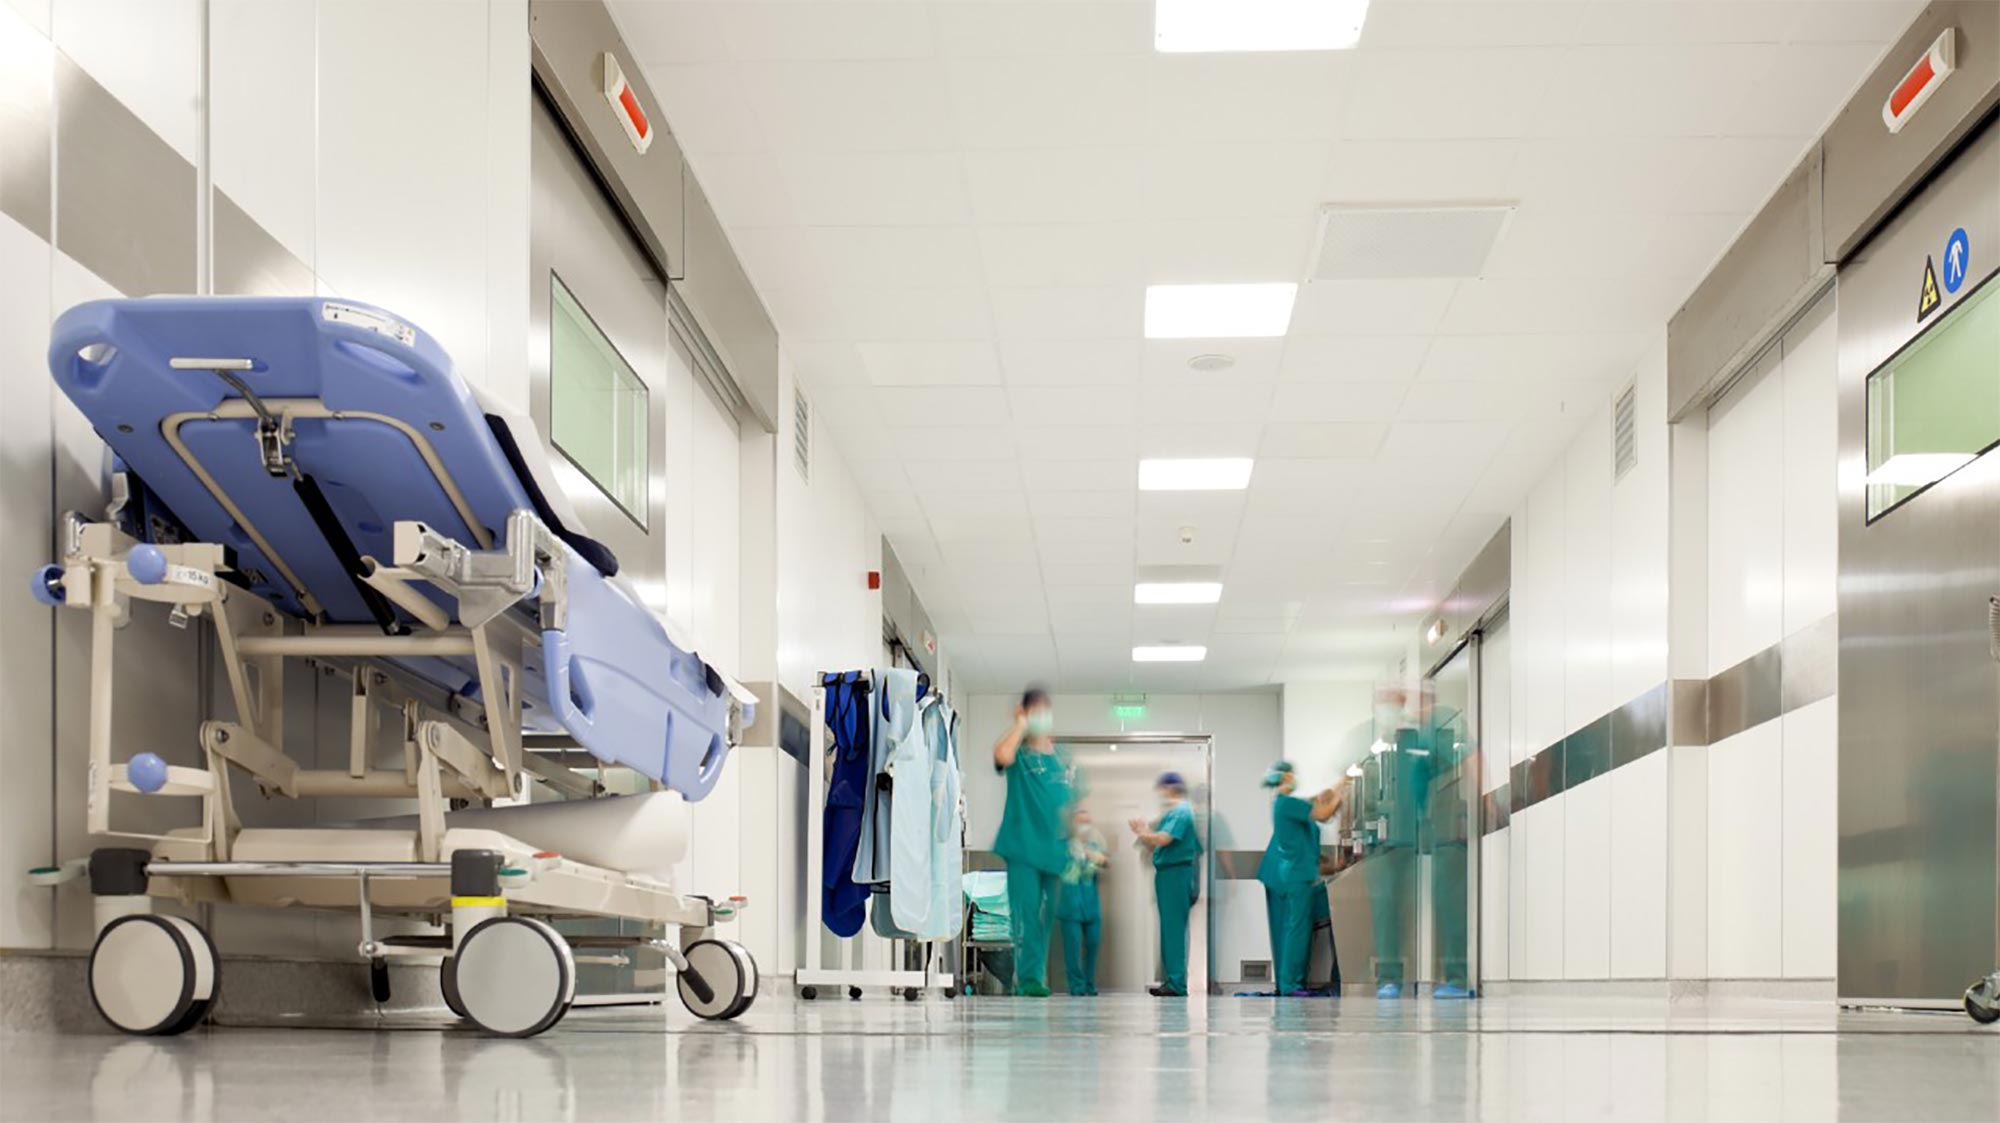 In healthcare facilities, lighting plays a critical role in patient satisfaction, staff productivity, and overall occupant well-being. Today’s healthcare facilities must meet the most demanding medical and building code requirements while balancing aesthetic and sensory needs to improve the patient experience, safety, and outcome. Explore some of our favorite healthcare lighting manufacturers below!